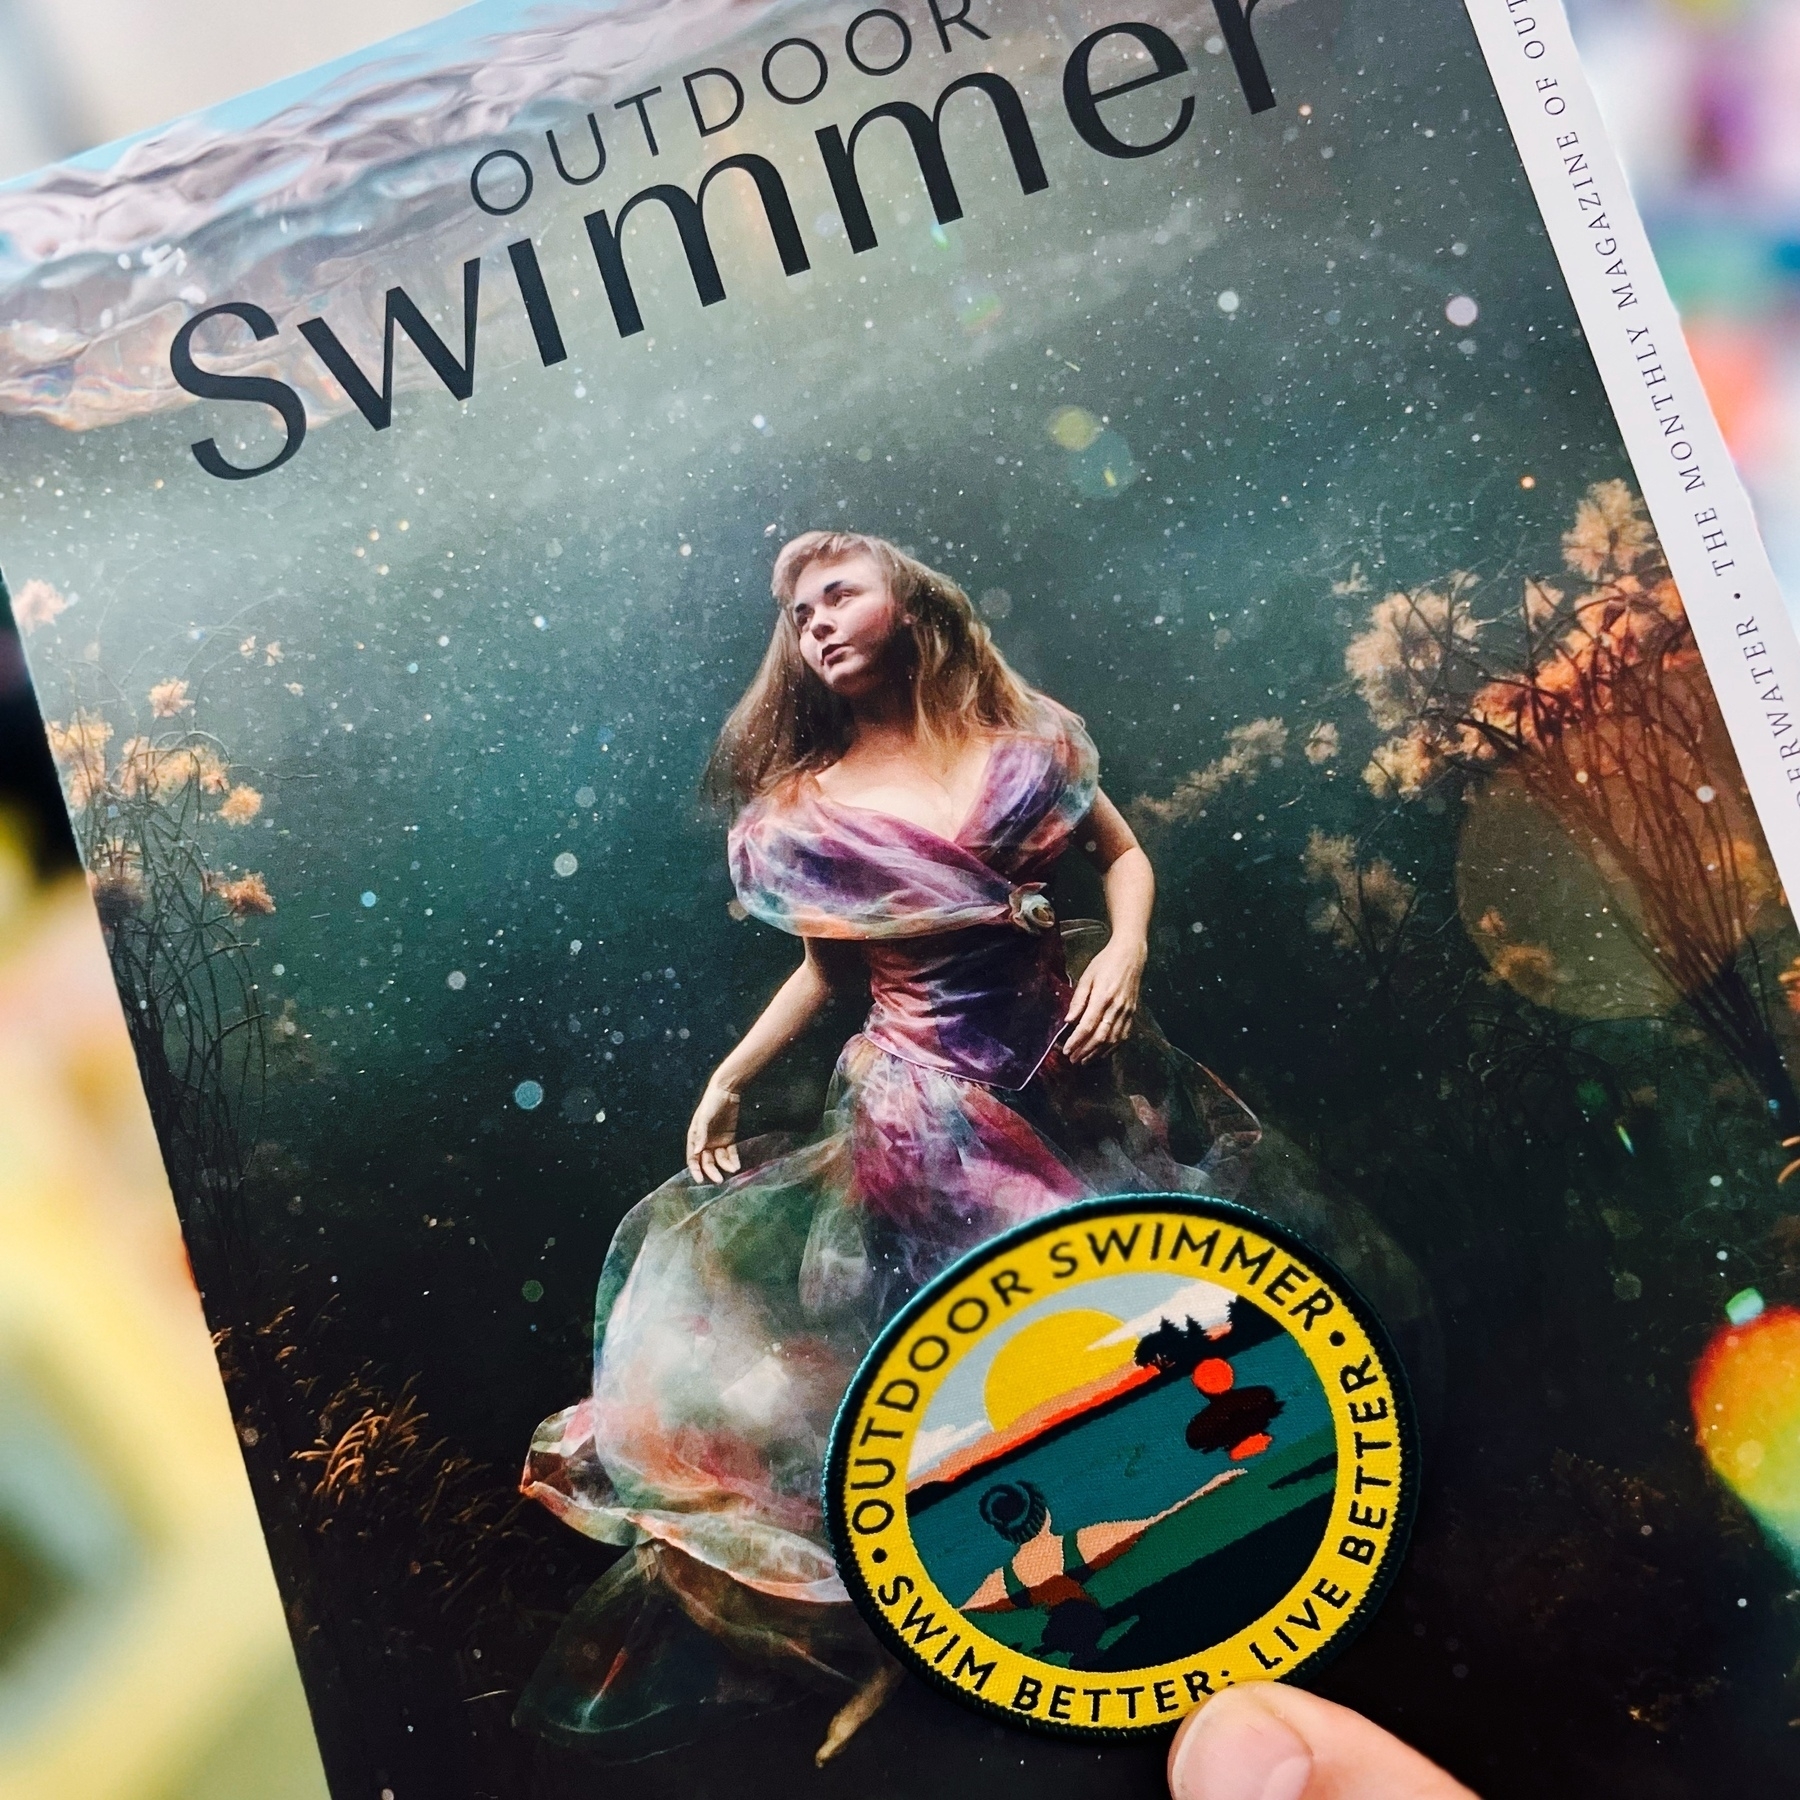 A subscriber patch and the latest copy of Outdoor Swimmer magazine. 